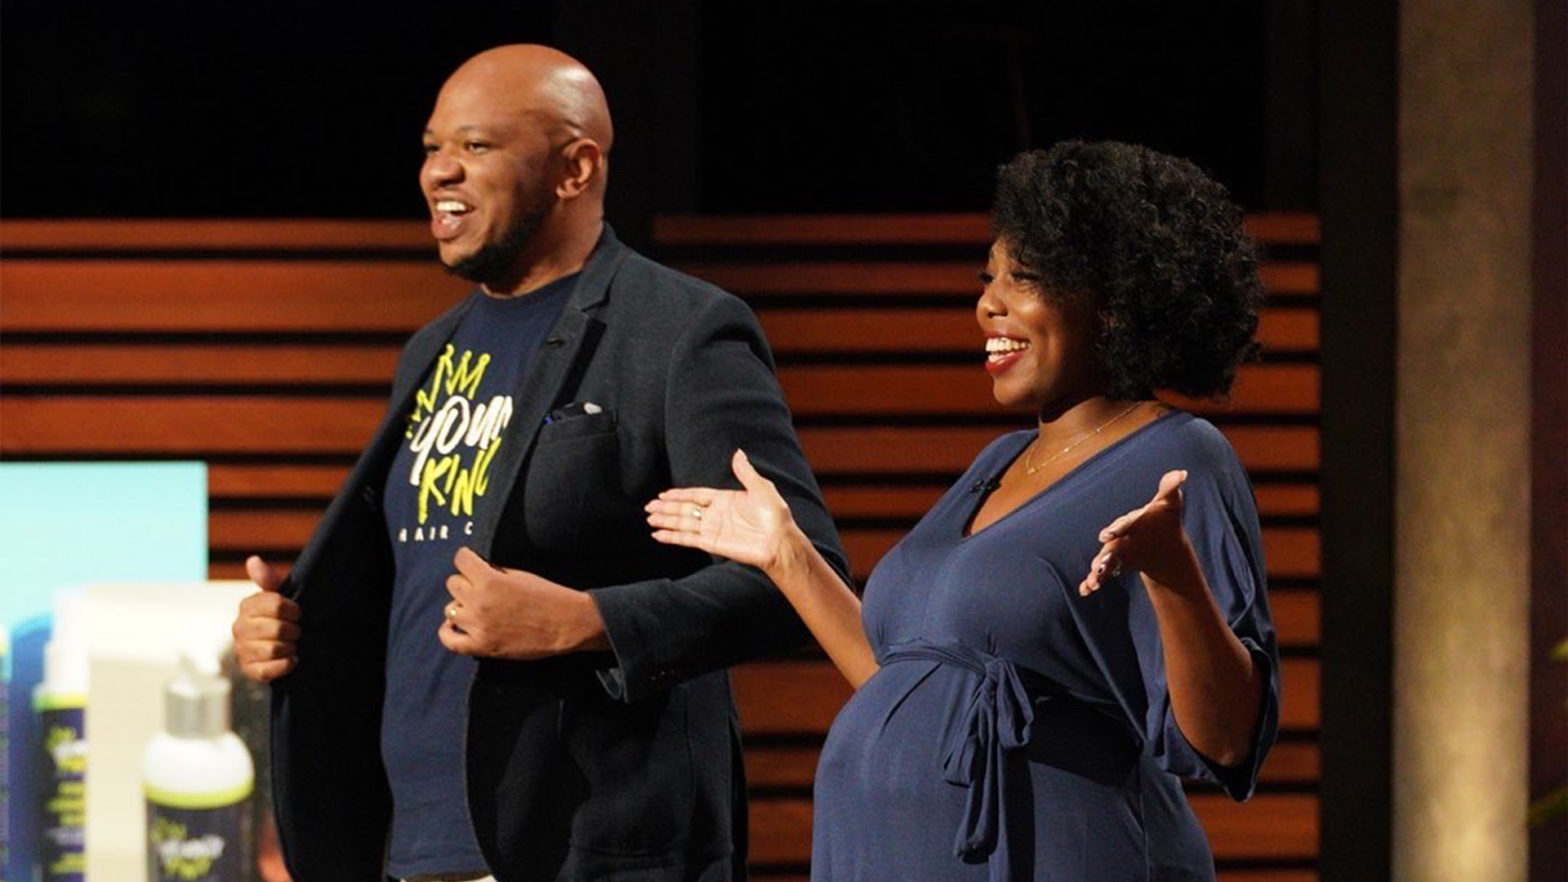 The Millers Take Young King Hair Care To NBC's 'Shark Tank' Following Exponential Growth In 2021